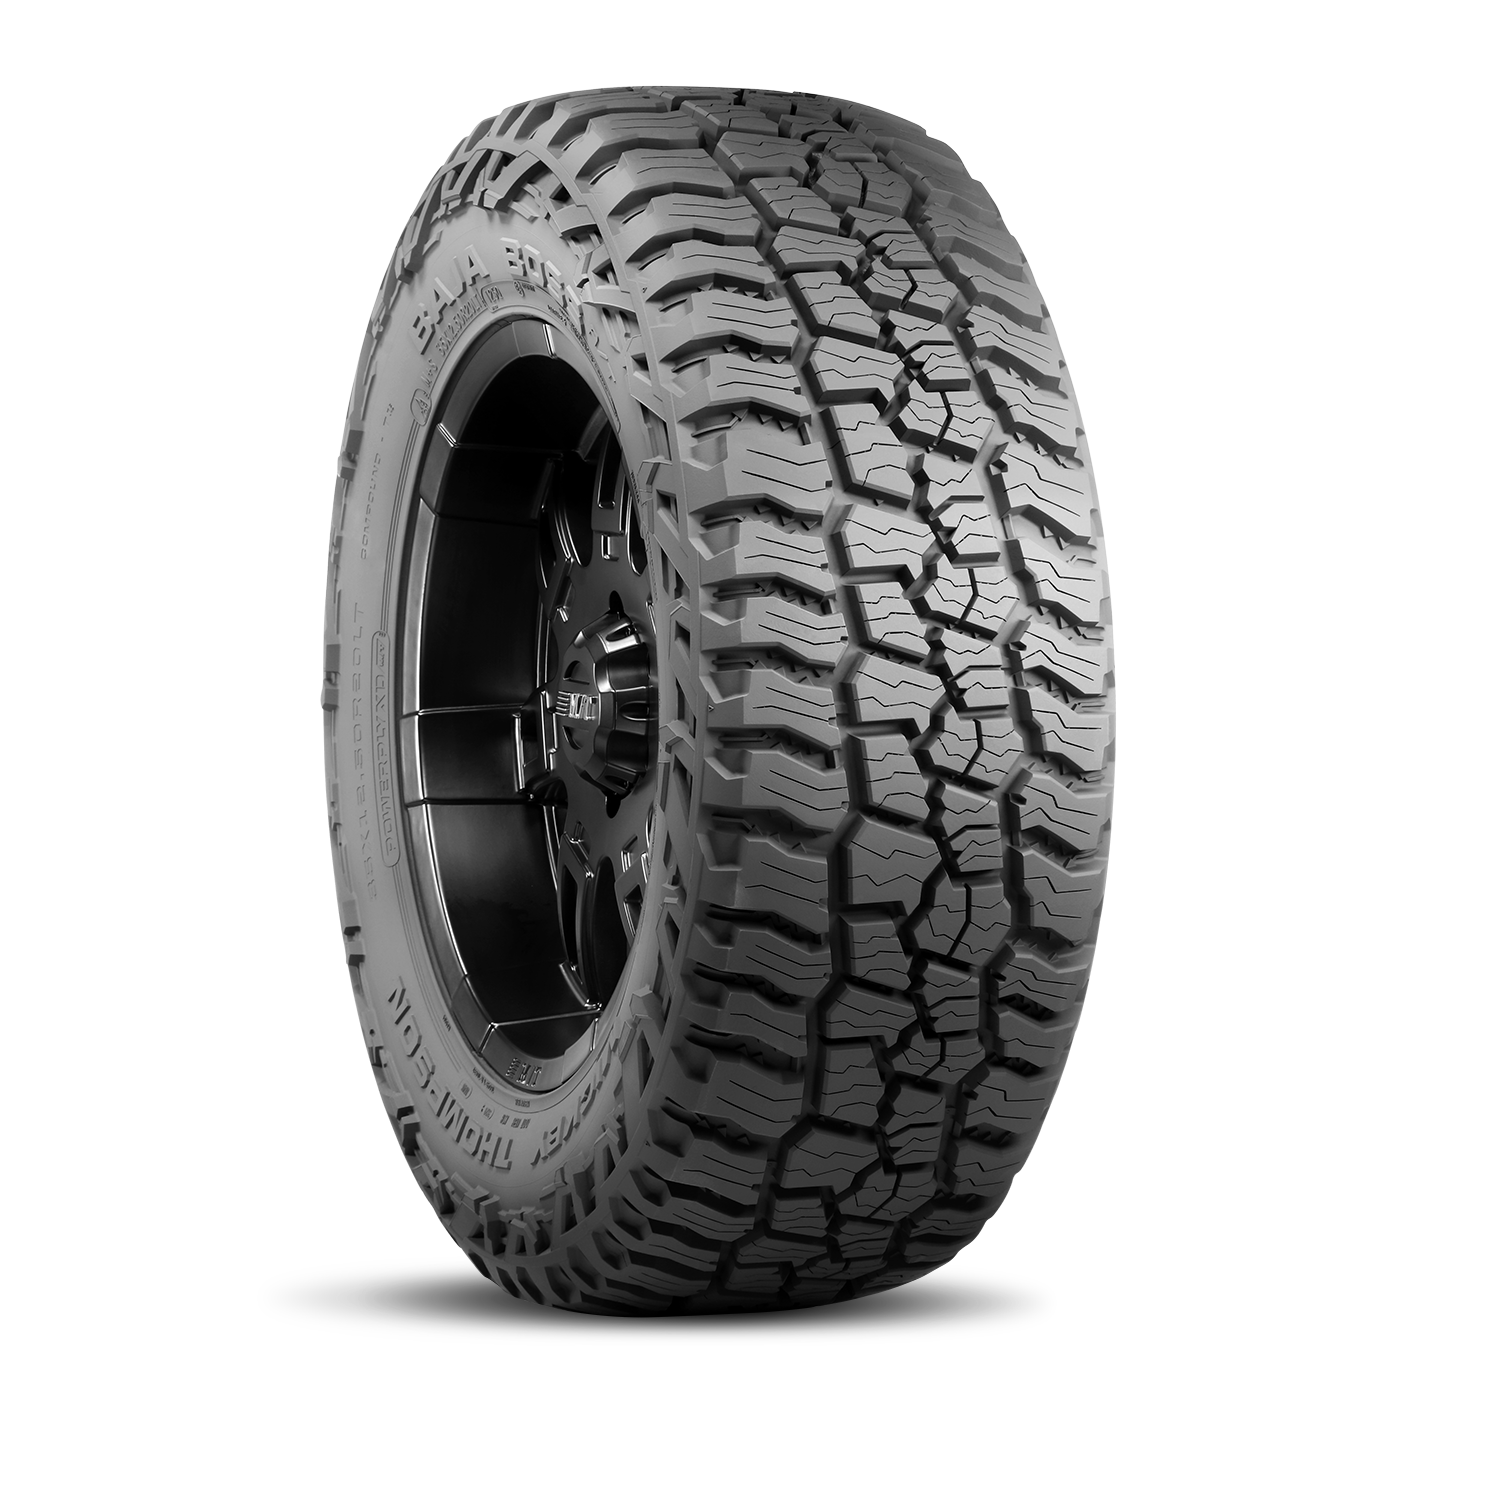 245/65R17 XL 111T MICKEY THOMPSON BAJA BOSS AT ALL-WEATHER TIRES (M+S + SNOWFLAKE)